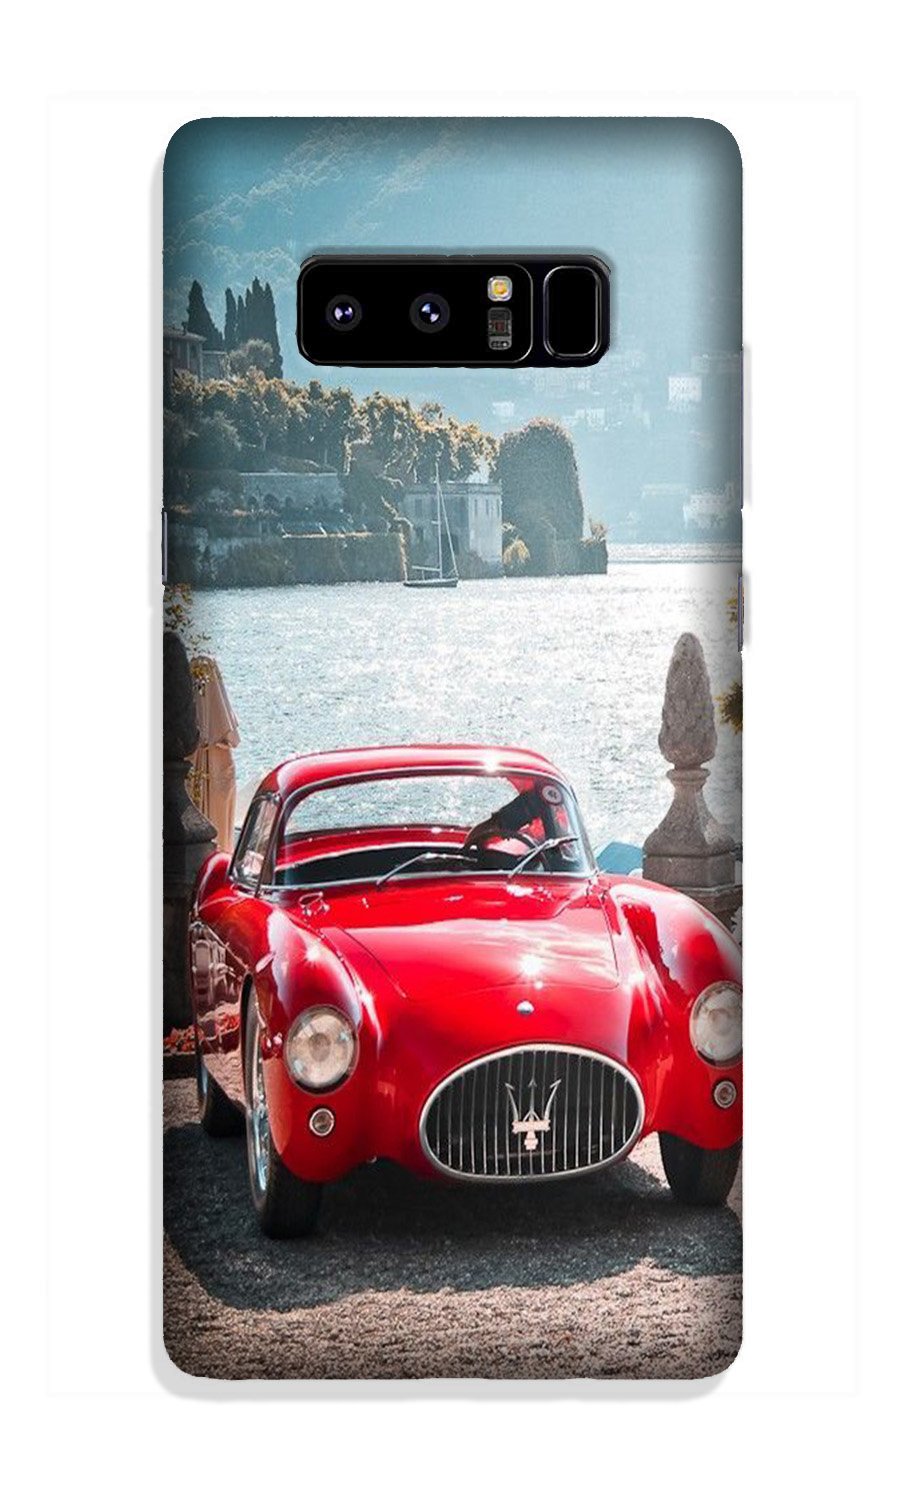 Vintage Car Case for Galaxy Note 8